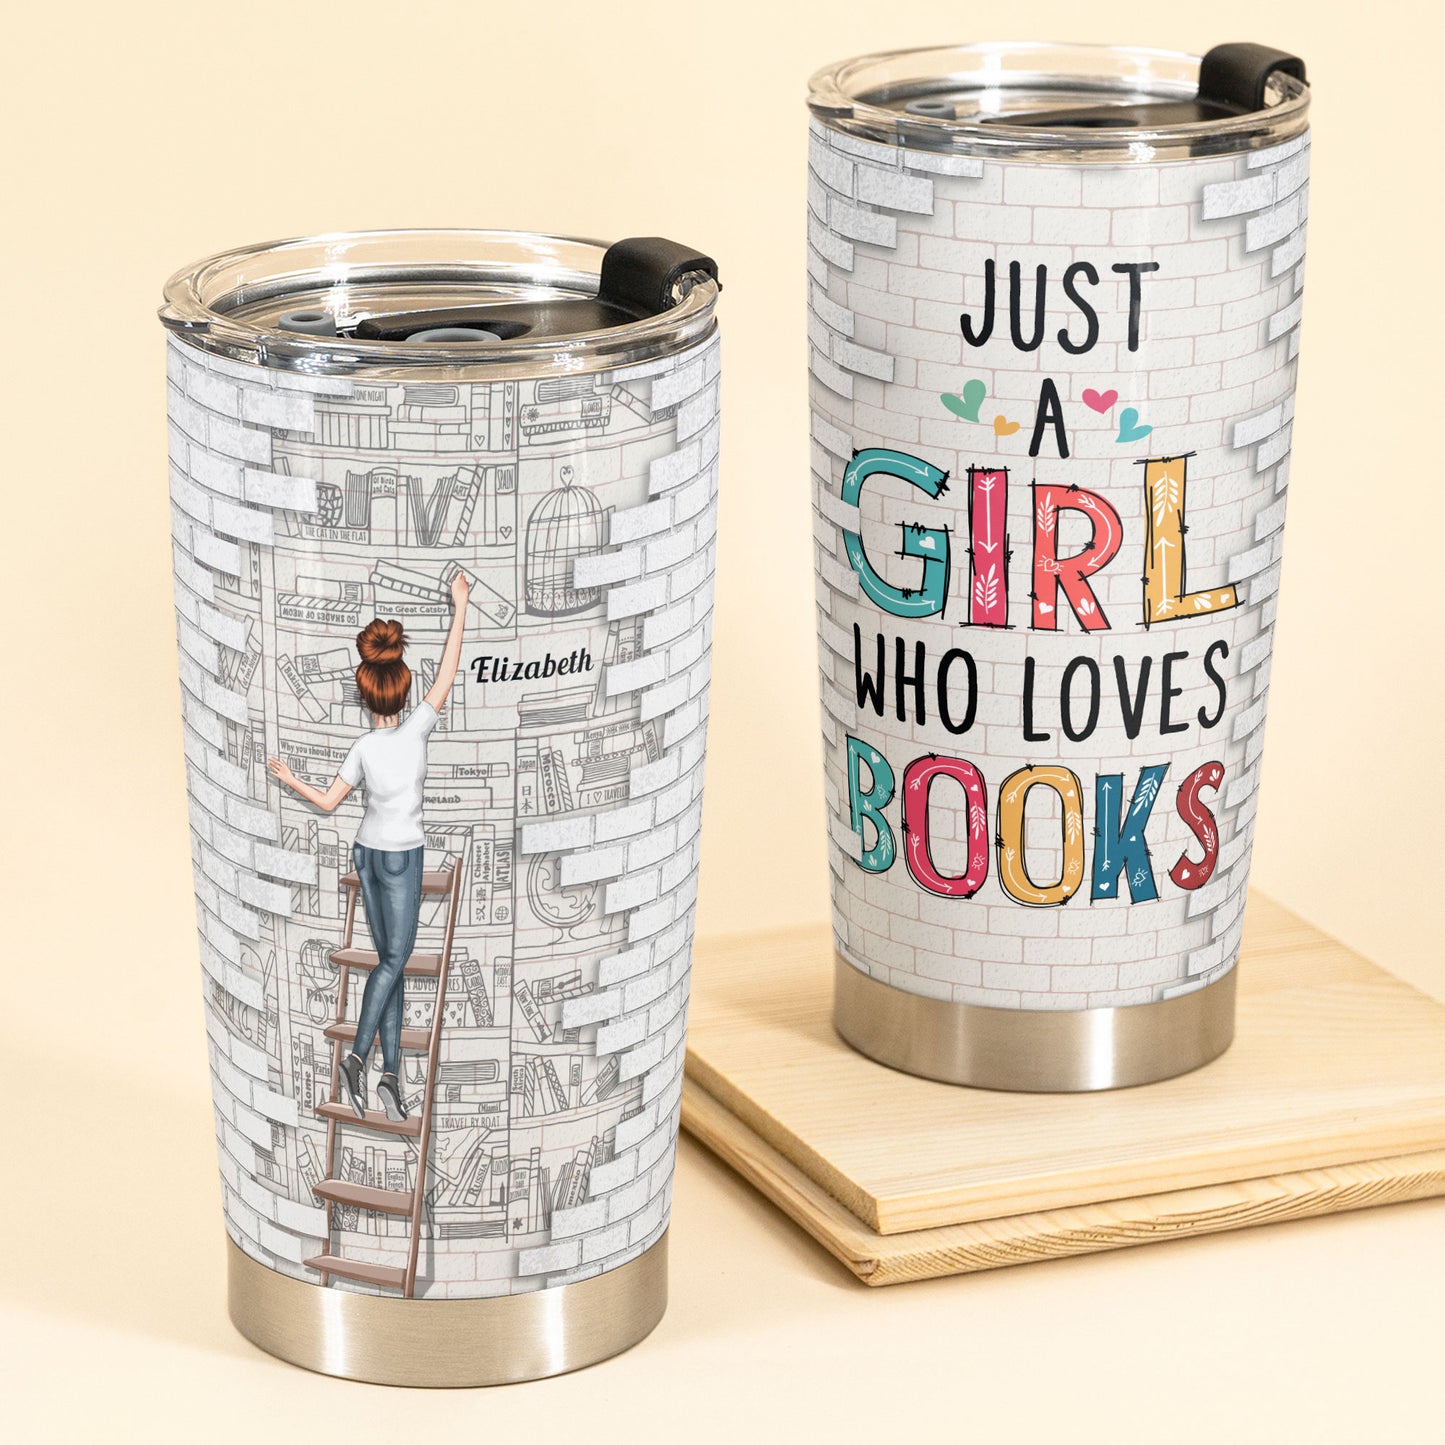 Just A Girl Who Loves Books - Personalized Tumbler Cup - Birthday Gifts For Women, Book Lovers